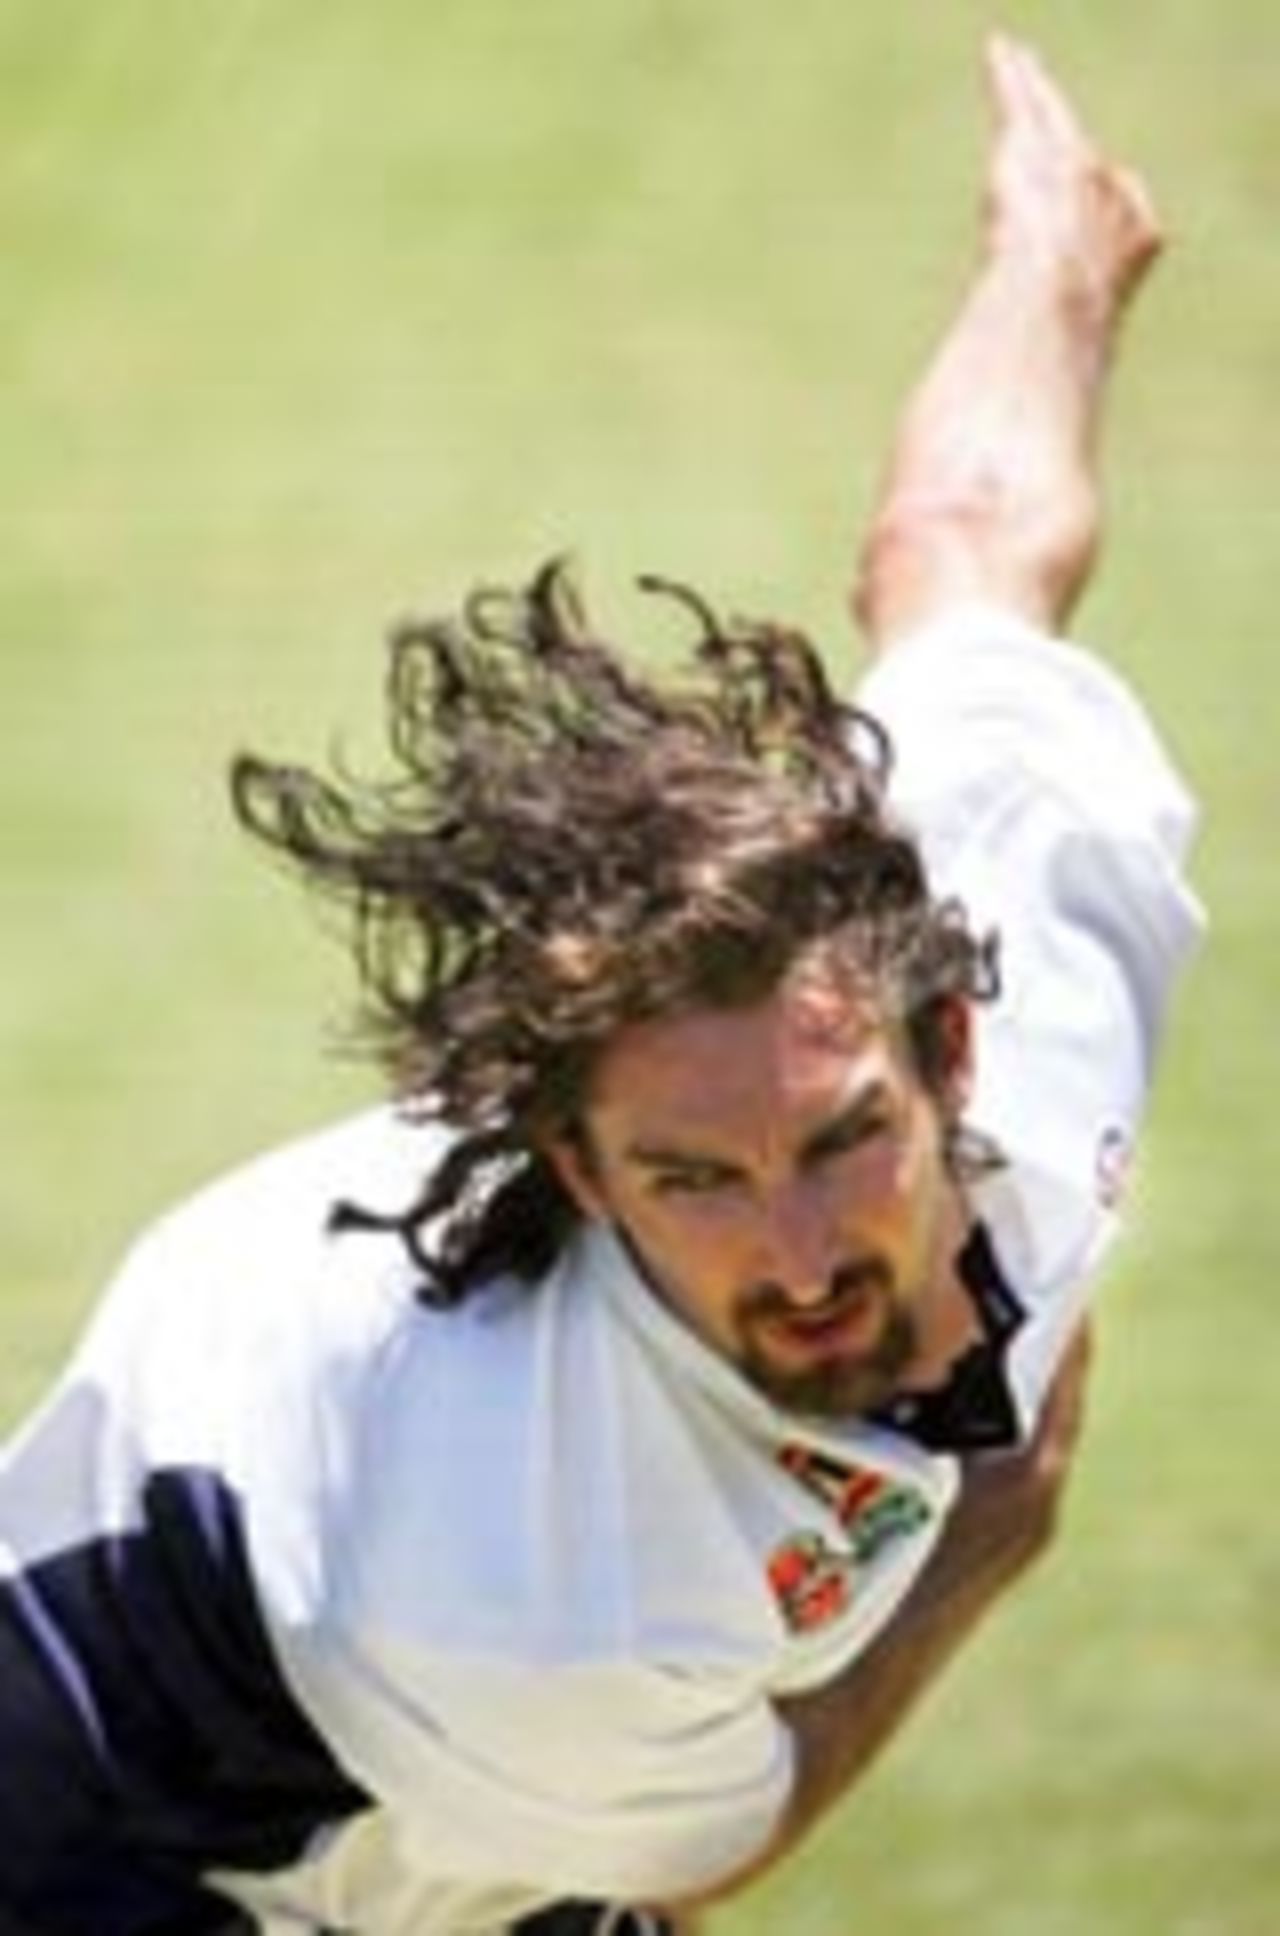 Jason Gillespie bowling in the nets at Perth, December 13, 2004